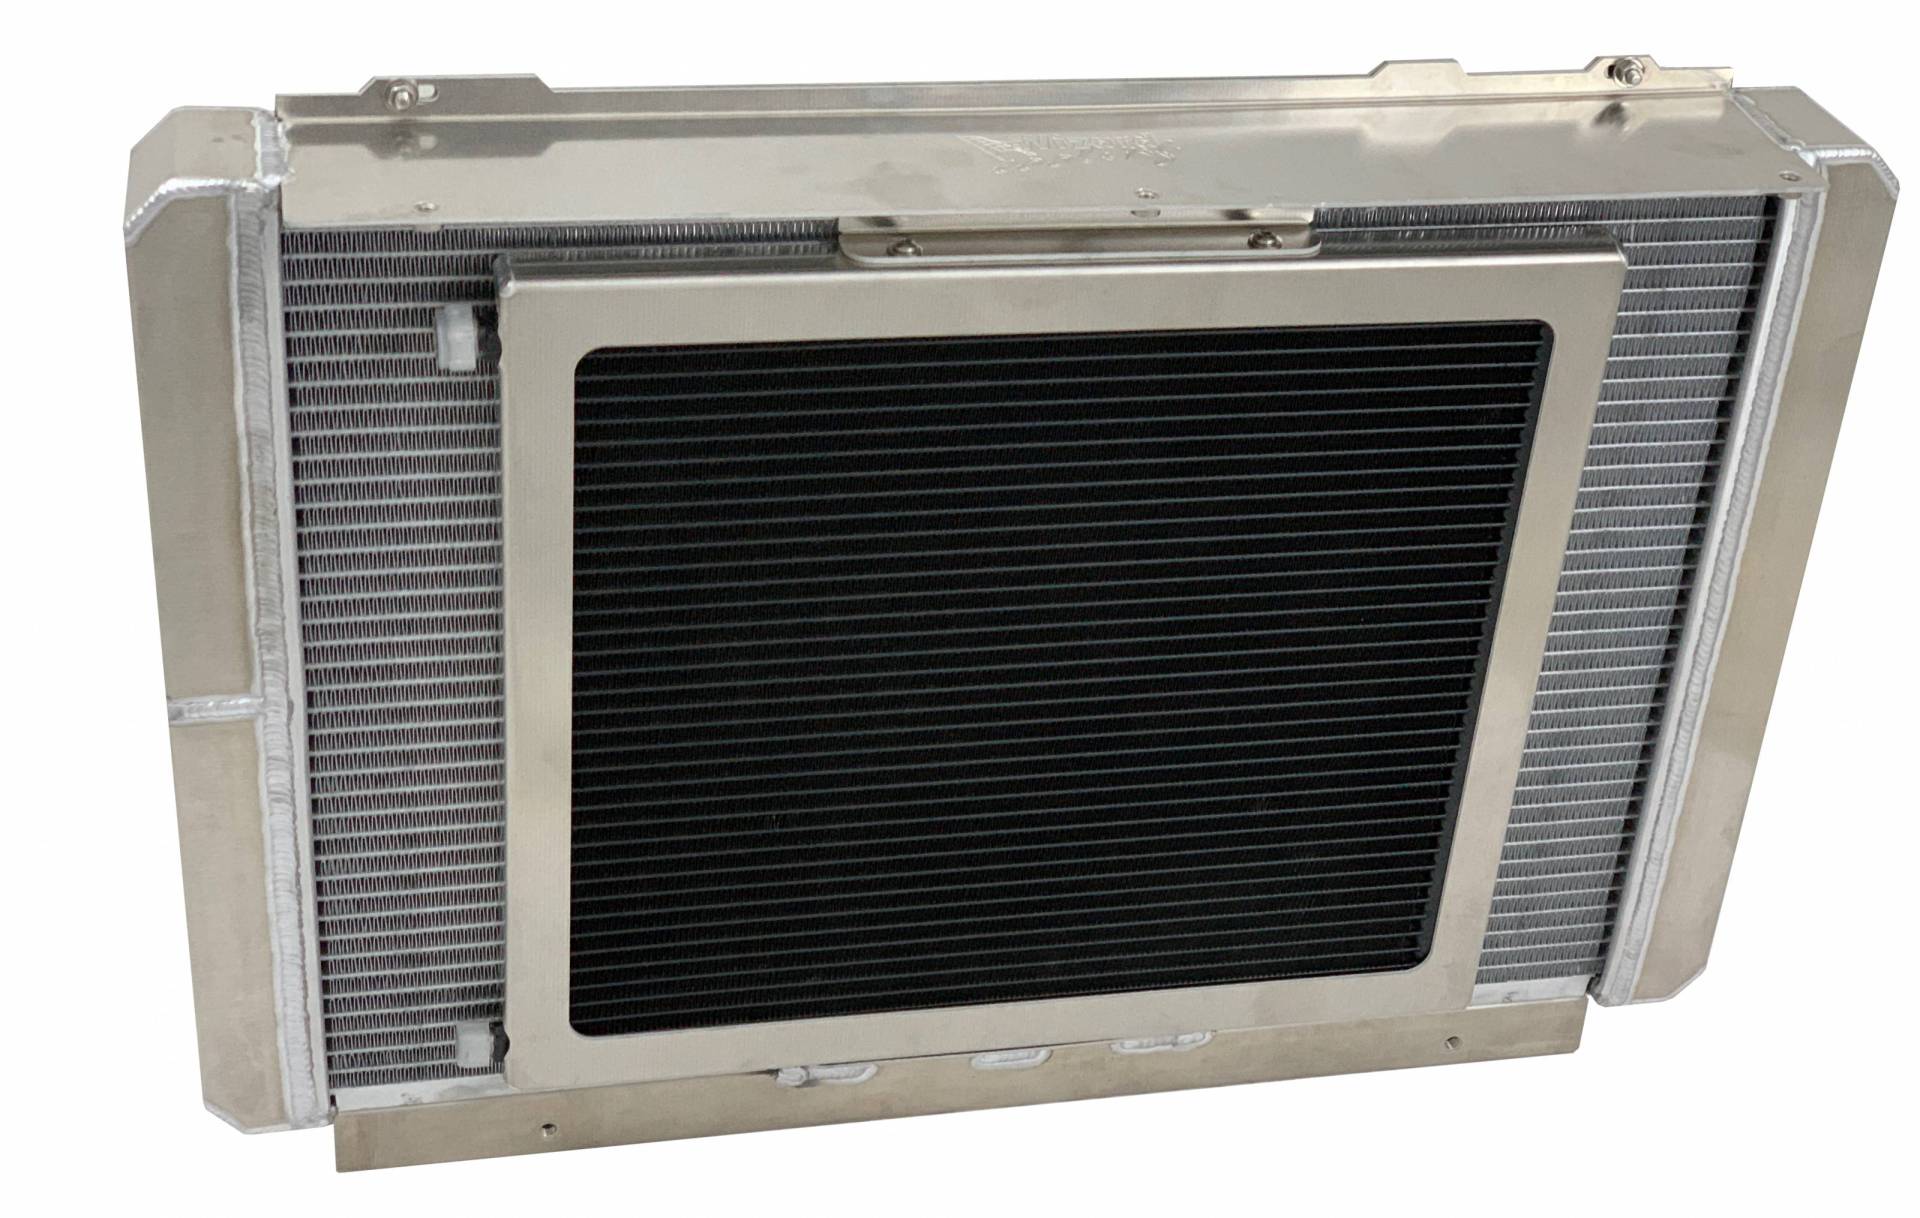 Wizard Cooling Inc - Wizard Cooling - 1966-1967 Lincoln Aluminum Radiator (LS Motor Swap, Dual Brushless Fans) - 41003-112BLLSAC